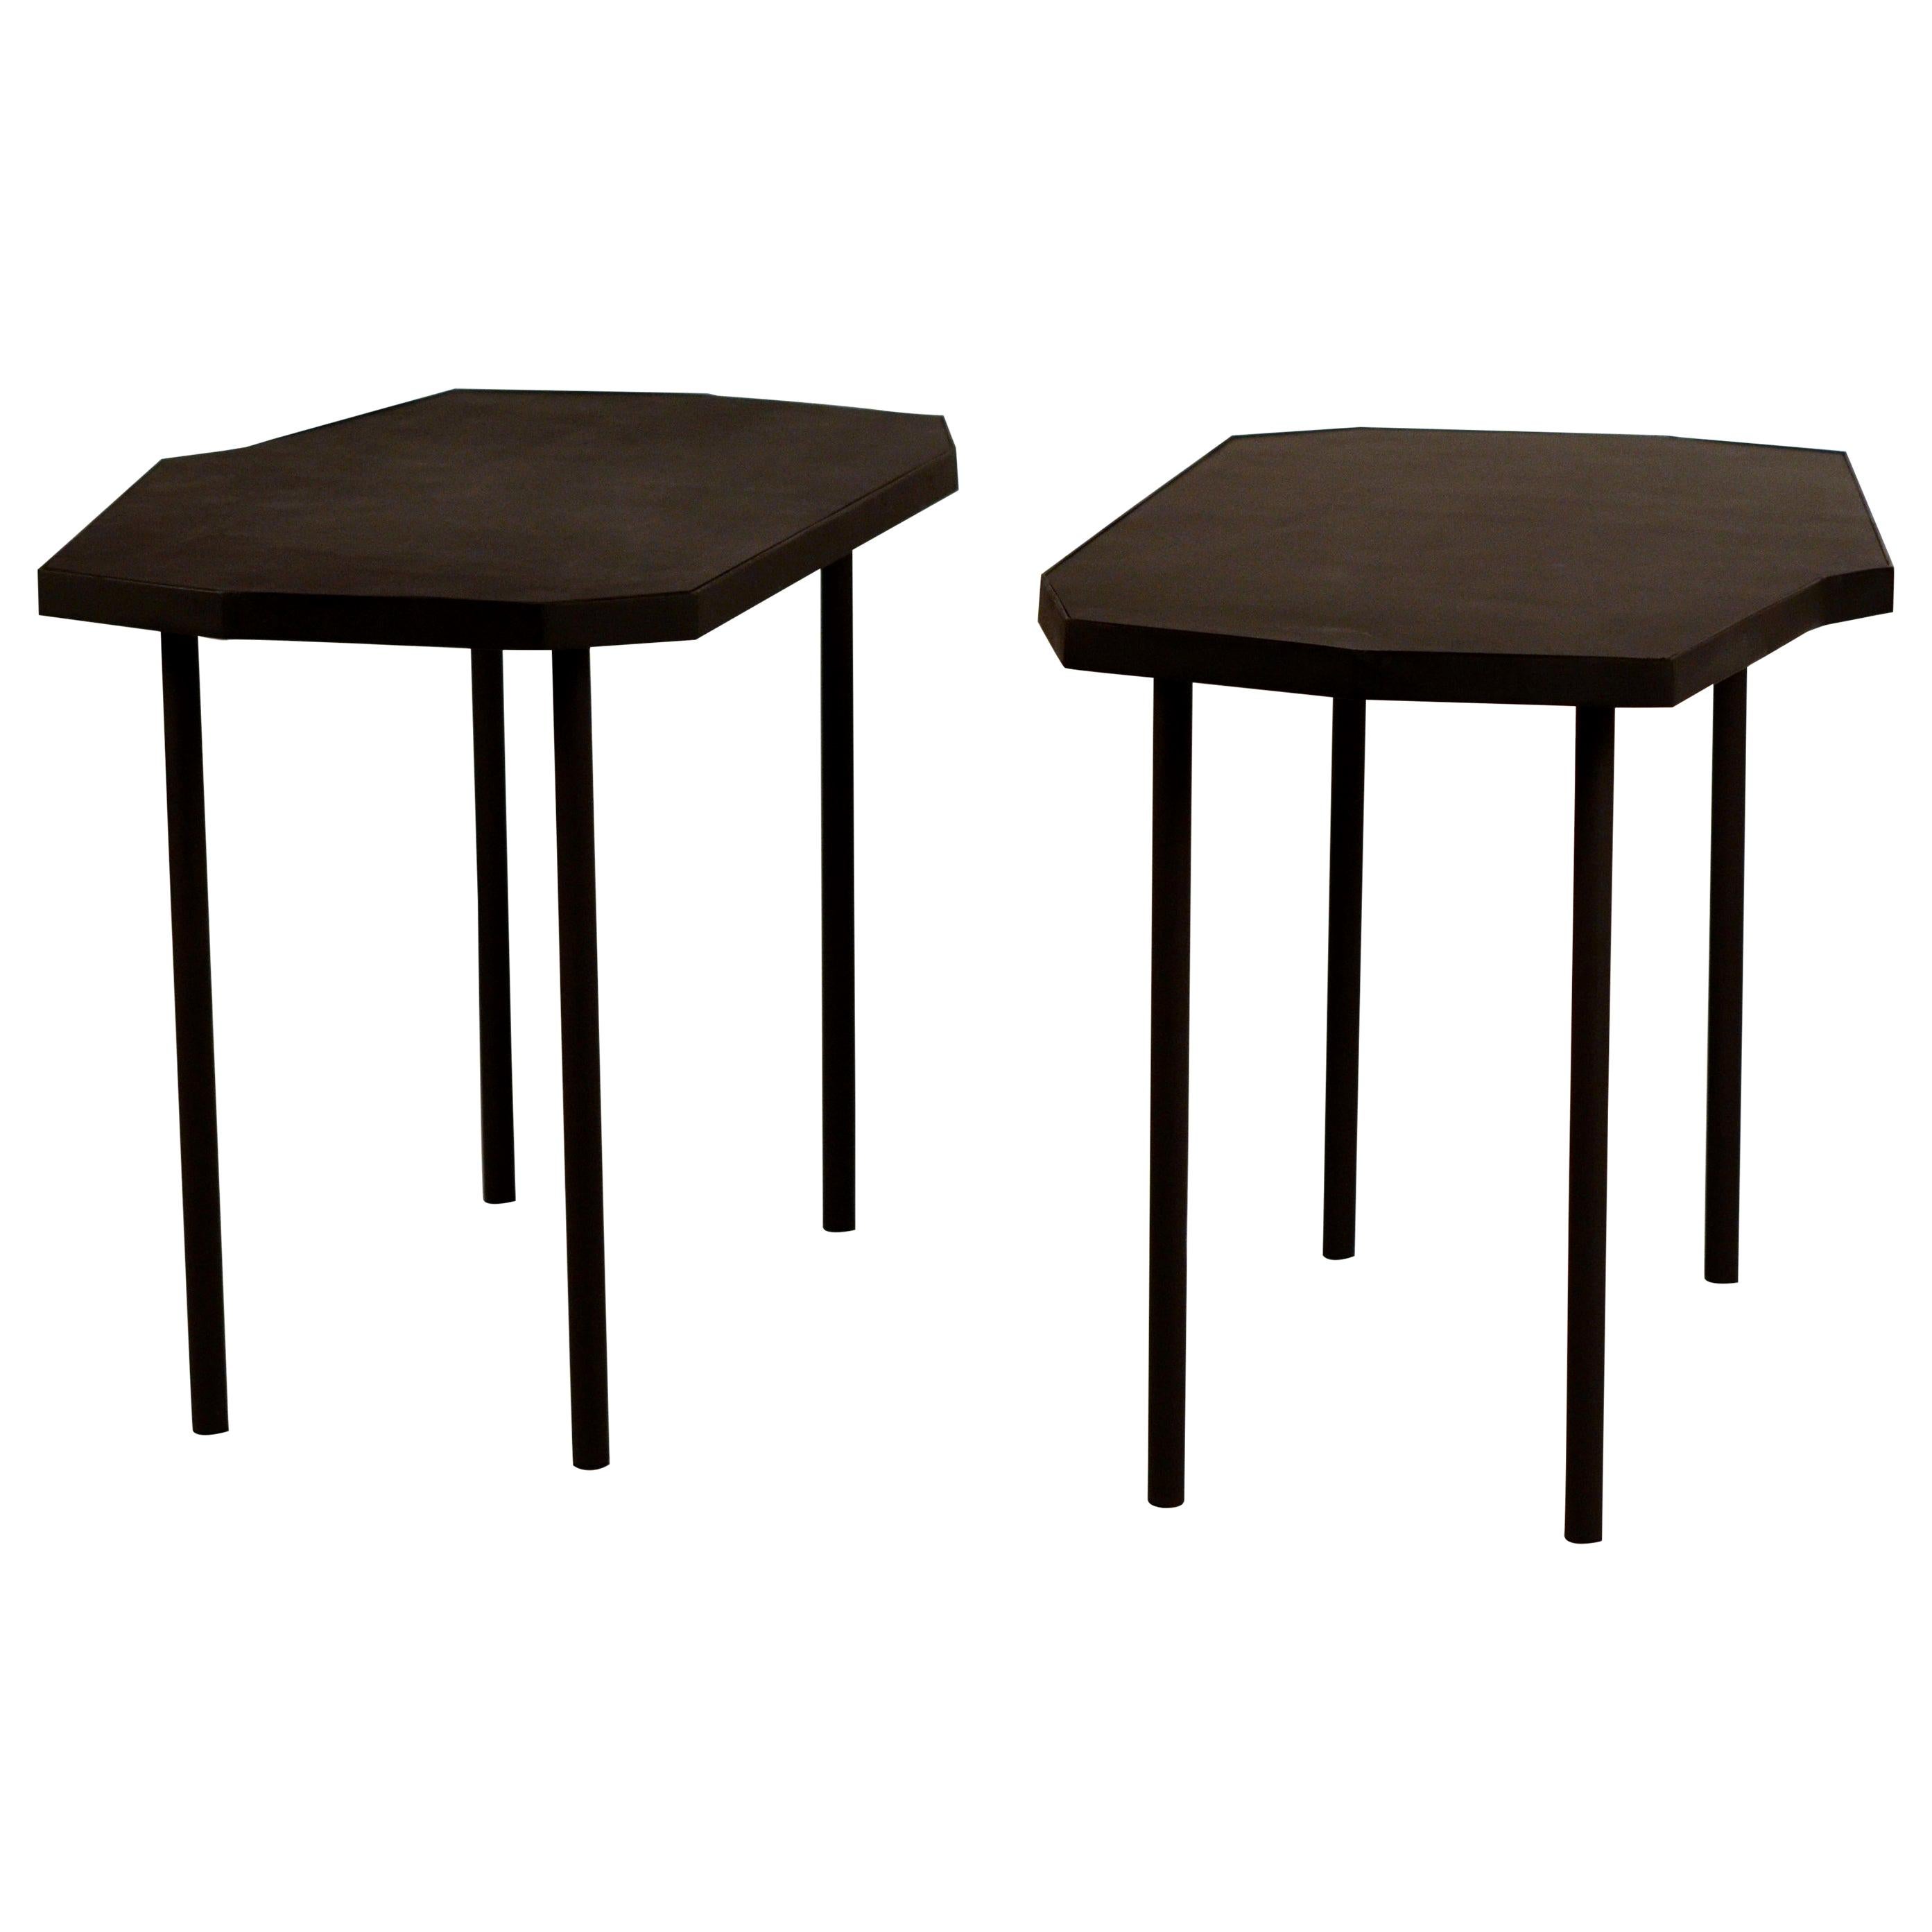 Pair of Asymmetrical 'Décagone' Black Leather Side Tables by Design Frères For Sale